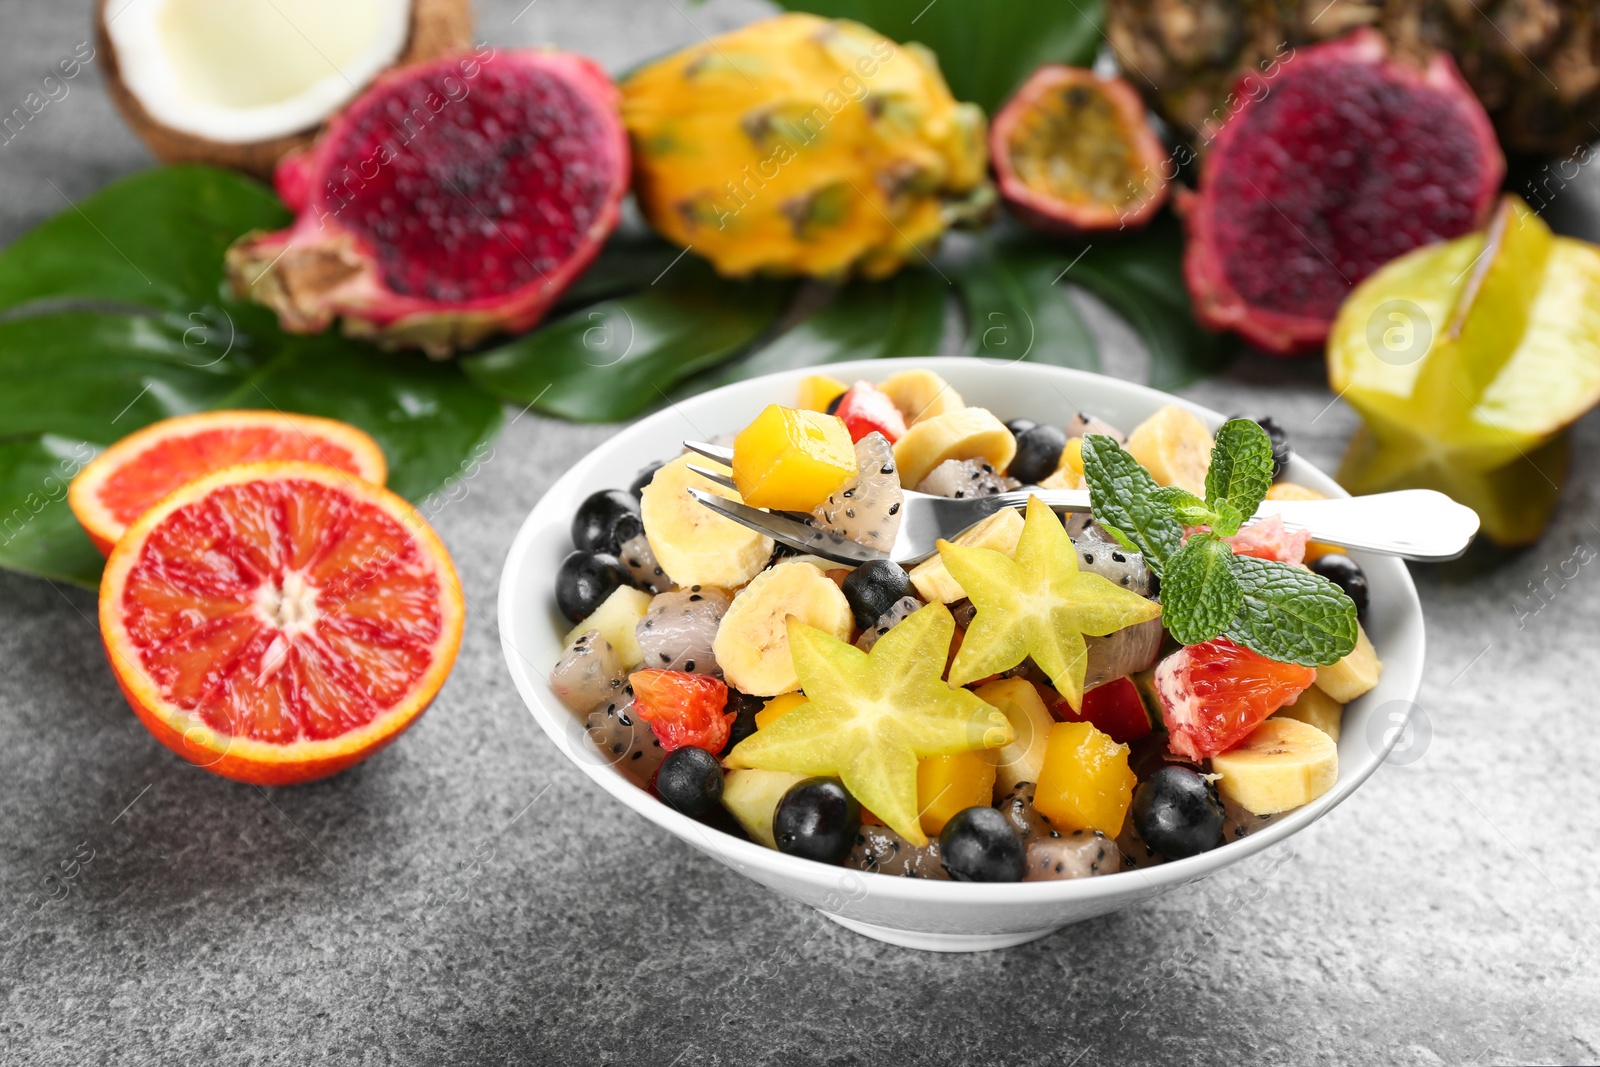 Photo of Delicious exotic fruit salad and ingredients on grey table